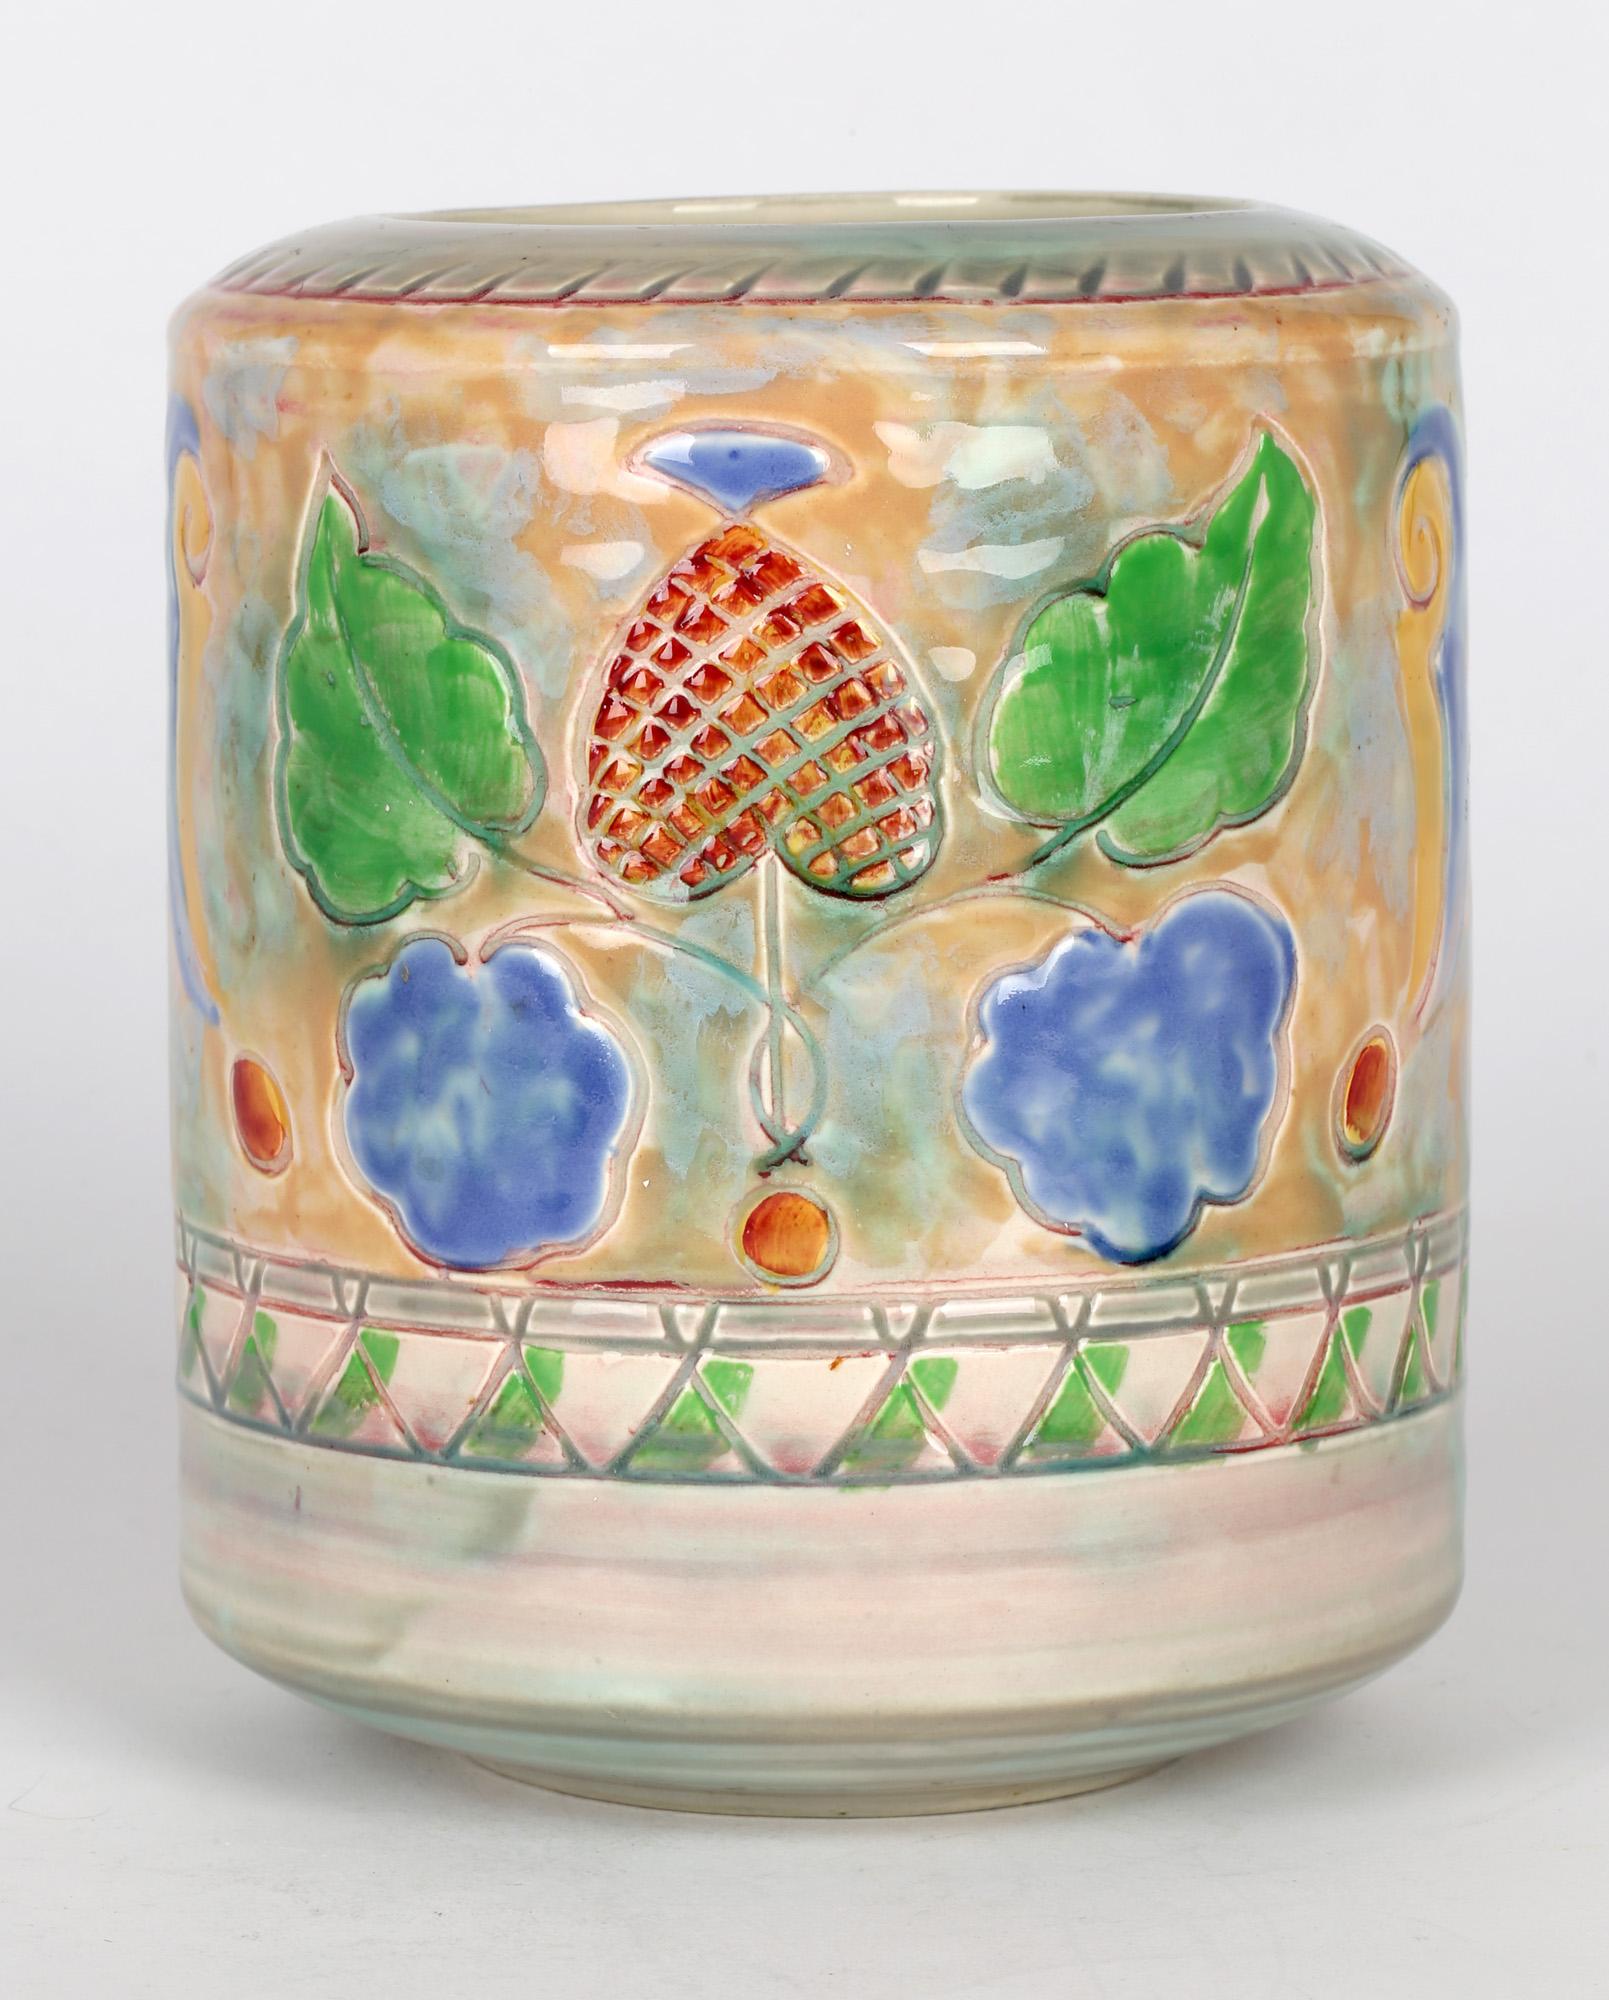 Frank Brangwyn Royal Doulton Arts & Crafts Leaf And Berry Art Pottery Vase For Sale 1